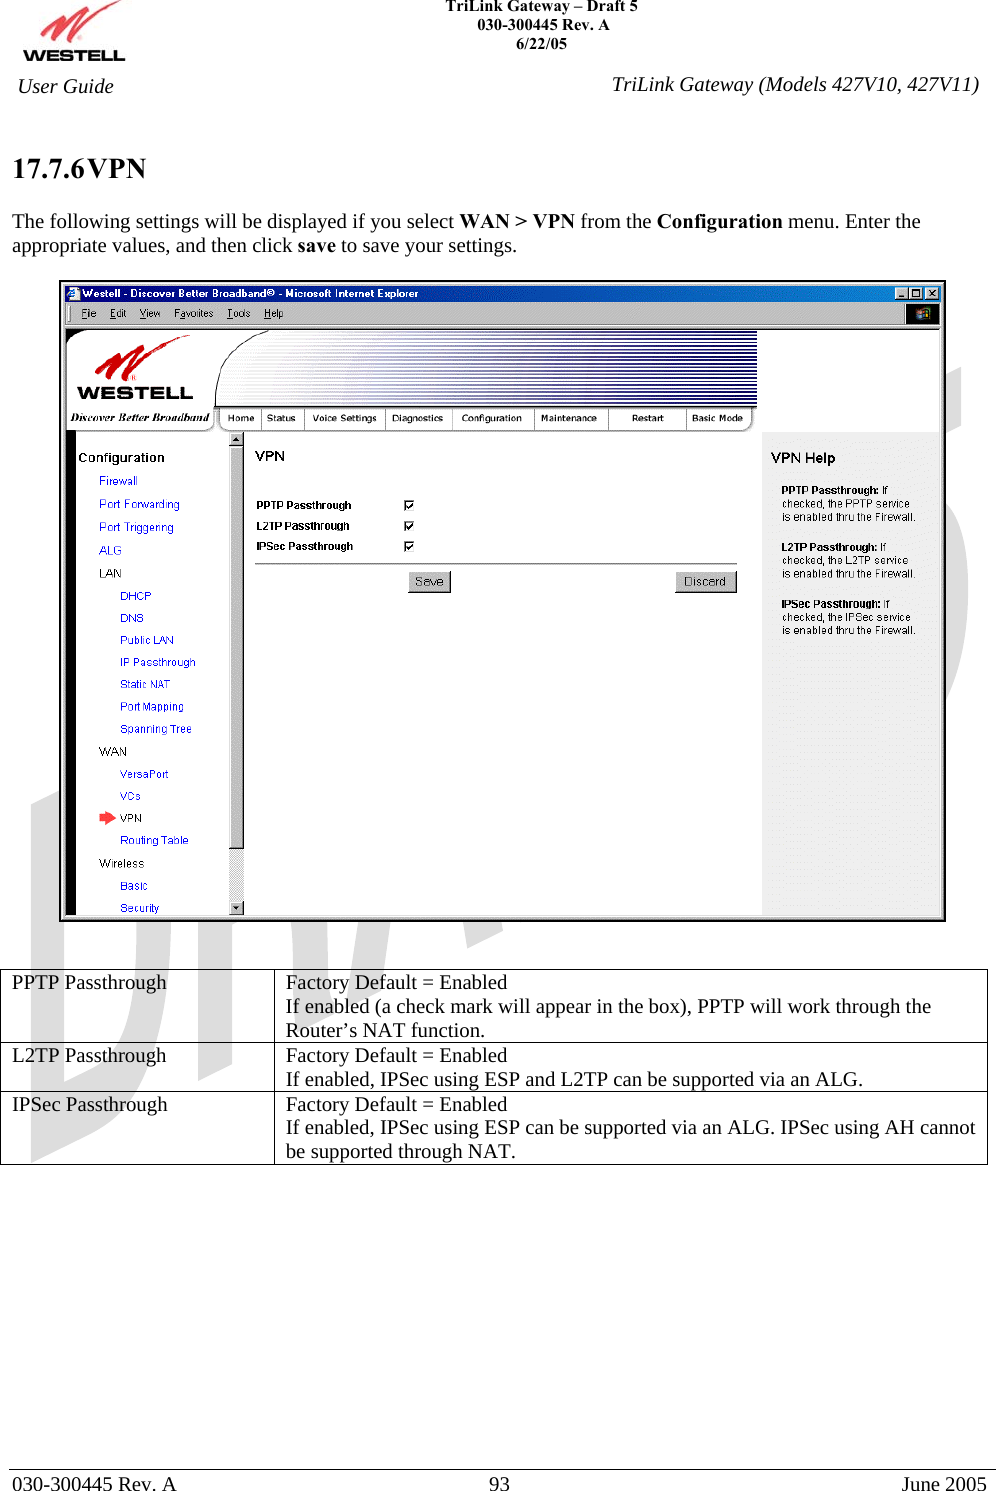    TriLink Gateway – Draft 5   030-300445 Rev. A 6/22/05   030-300445 Rev. A  93  June 2005  User Guide  TriLink Gateway (Models 427V10, 427V11) 17.7.6 VPN  The following settings will be displayed if you select WAN &gt; VPN from the Configuration menu. Enter the appropriate values, and then click save to save your settings.     PPTP Passthrough  Factory Default = Enabled If enabled (a check mark will appear in the box), PPTP will work through the Router’s NAT function. L2TP Passthrough  Factory Default = Enabled If enabled, IPSec using ESP and L2TP can be supported via an ALG. IPSec Passthrough  Factory Default = Enabled If enabled, IPSec using ESP can be supported via an ALG. IPSec using AH cannot be supported through NAT.             